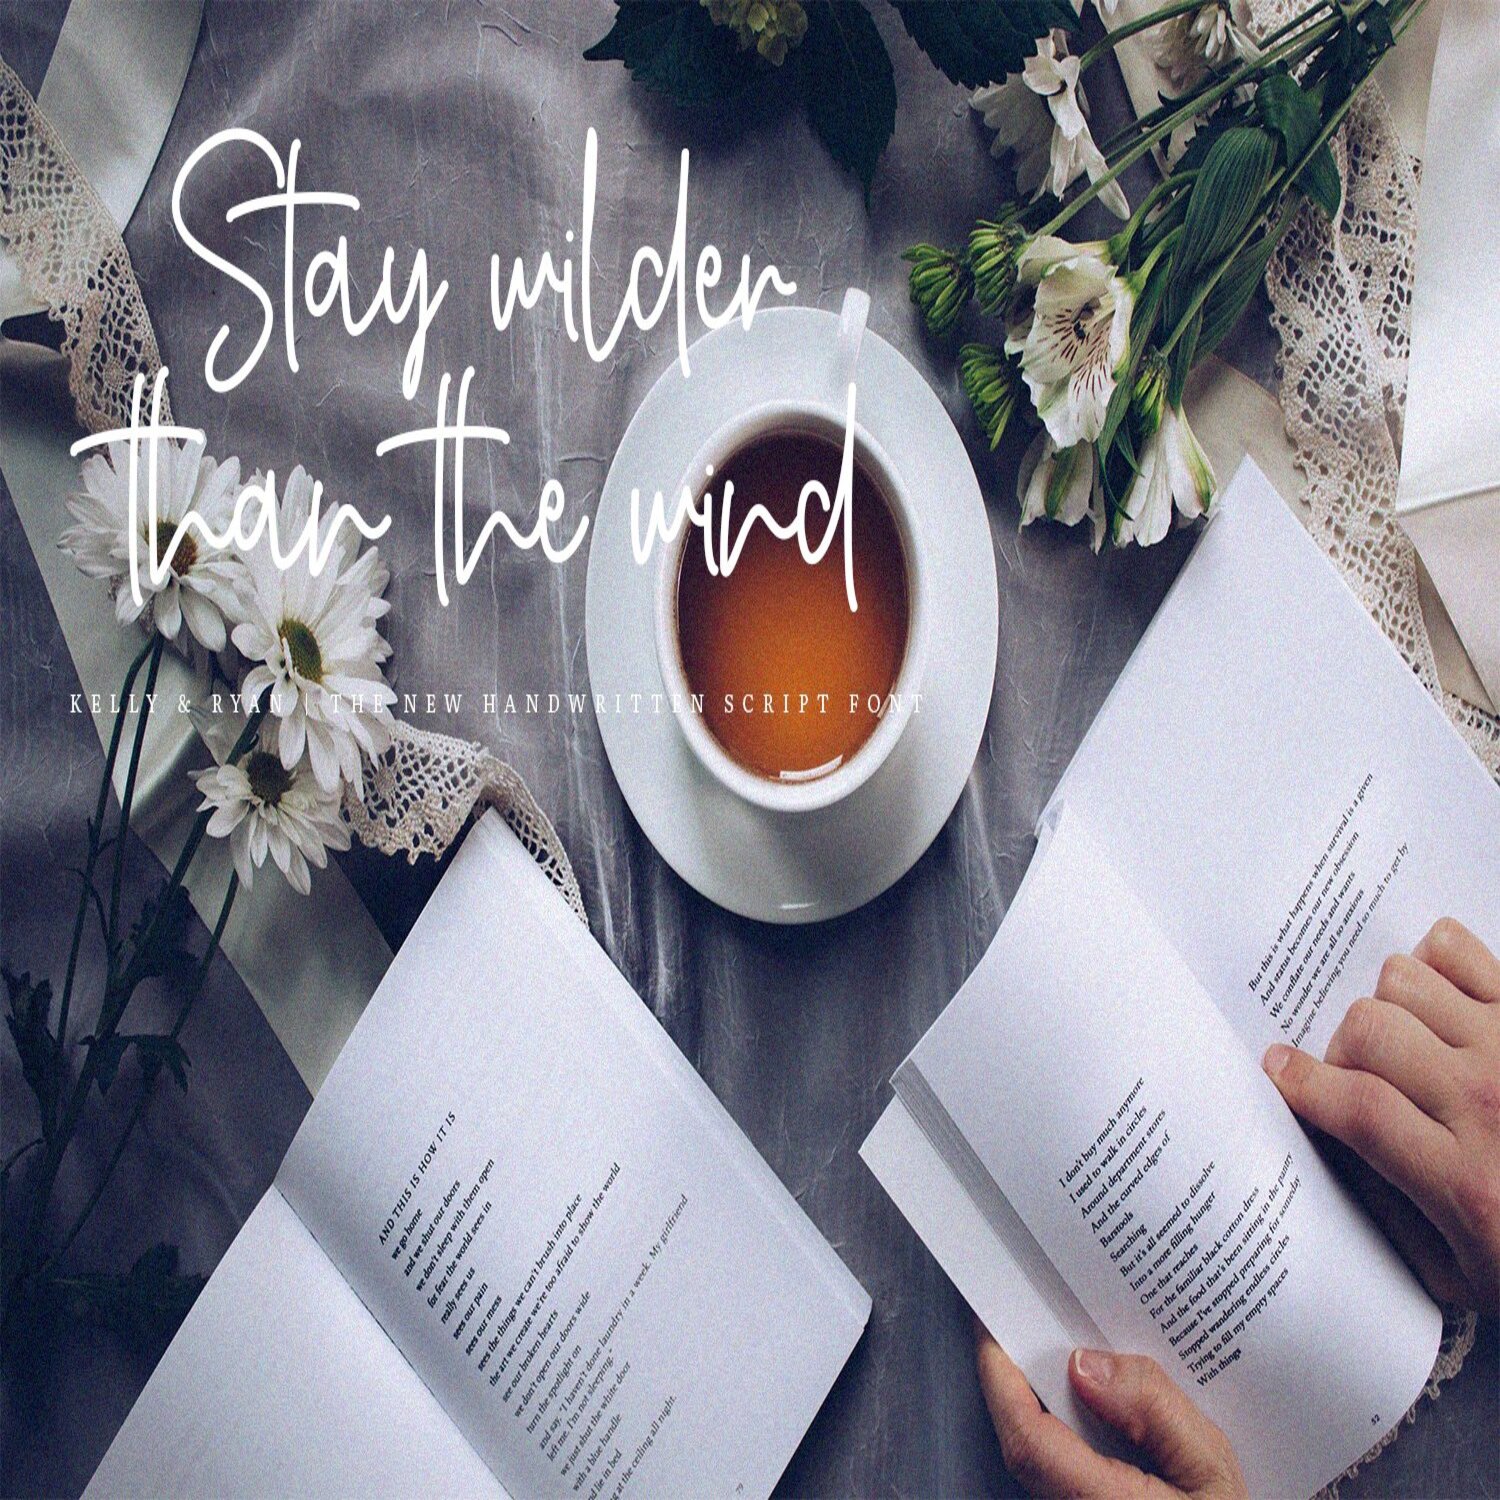 Kelly & Ryan | The Handwritten Font cover image.